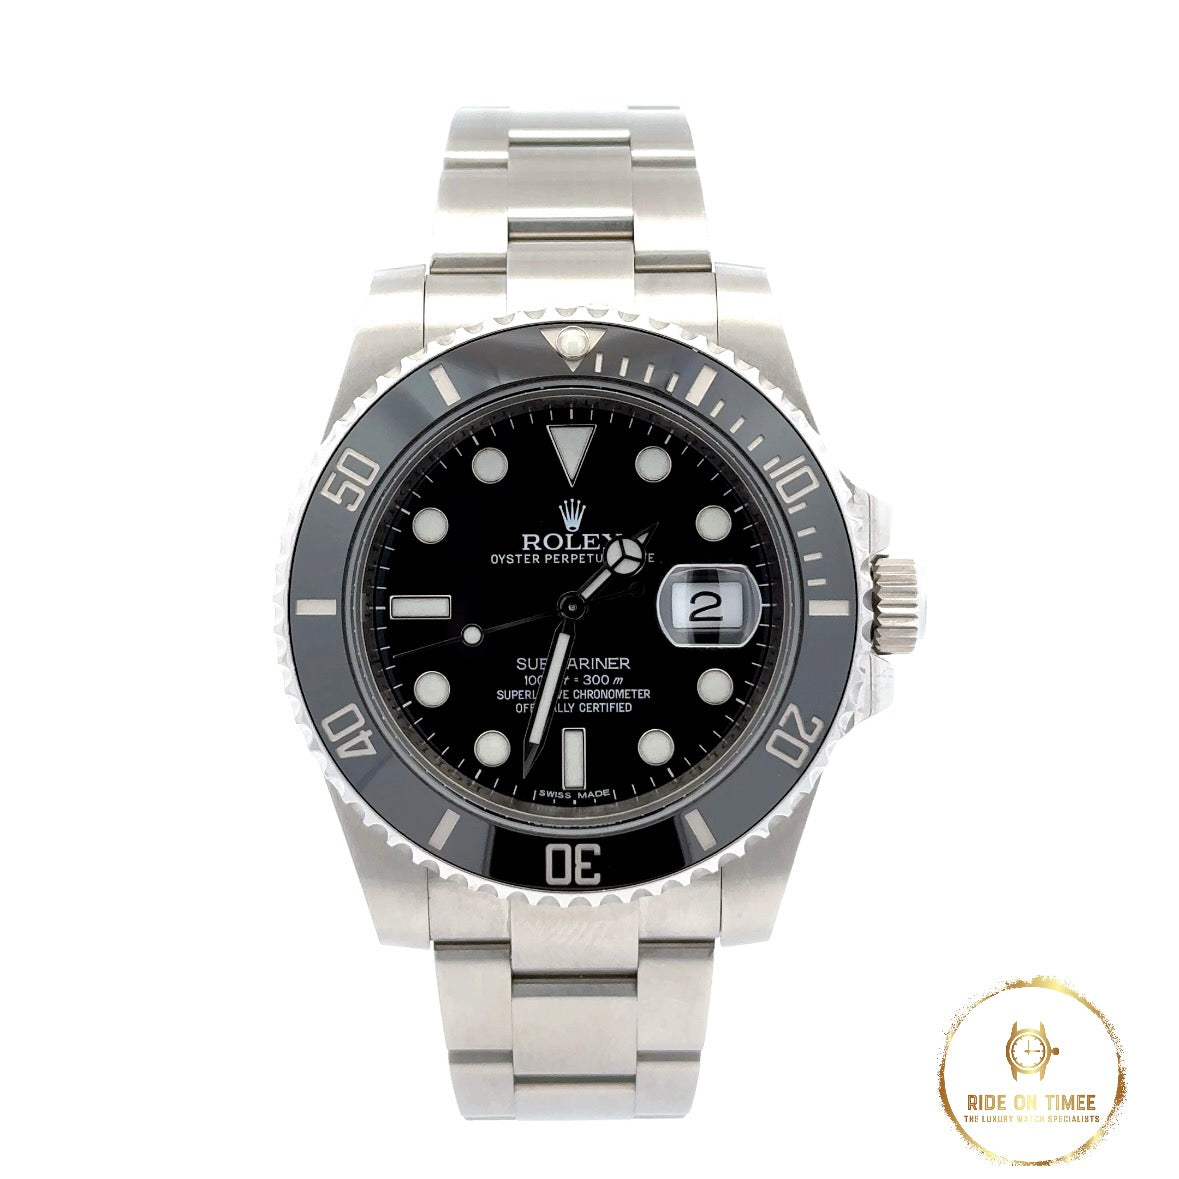 Rolex Submariner Date 40mm Discontinued ‘116610LN’ - Ride On Timee